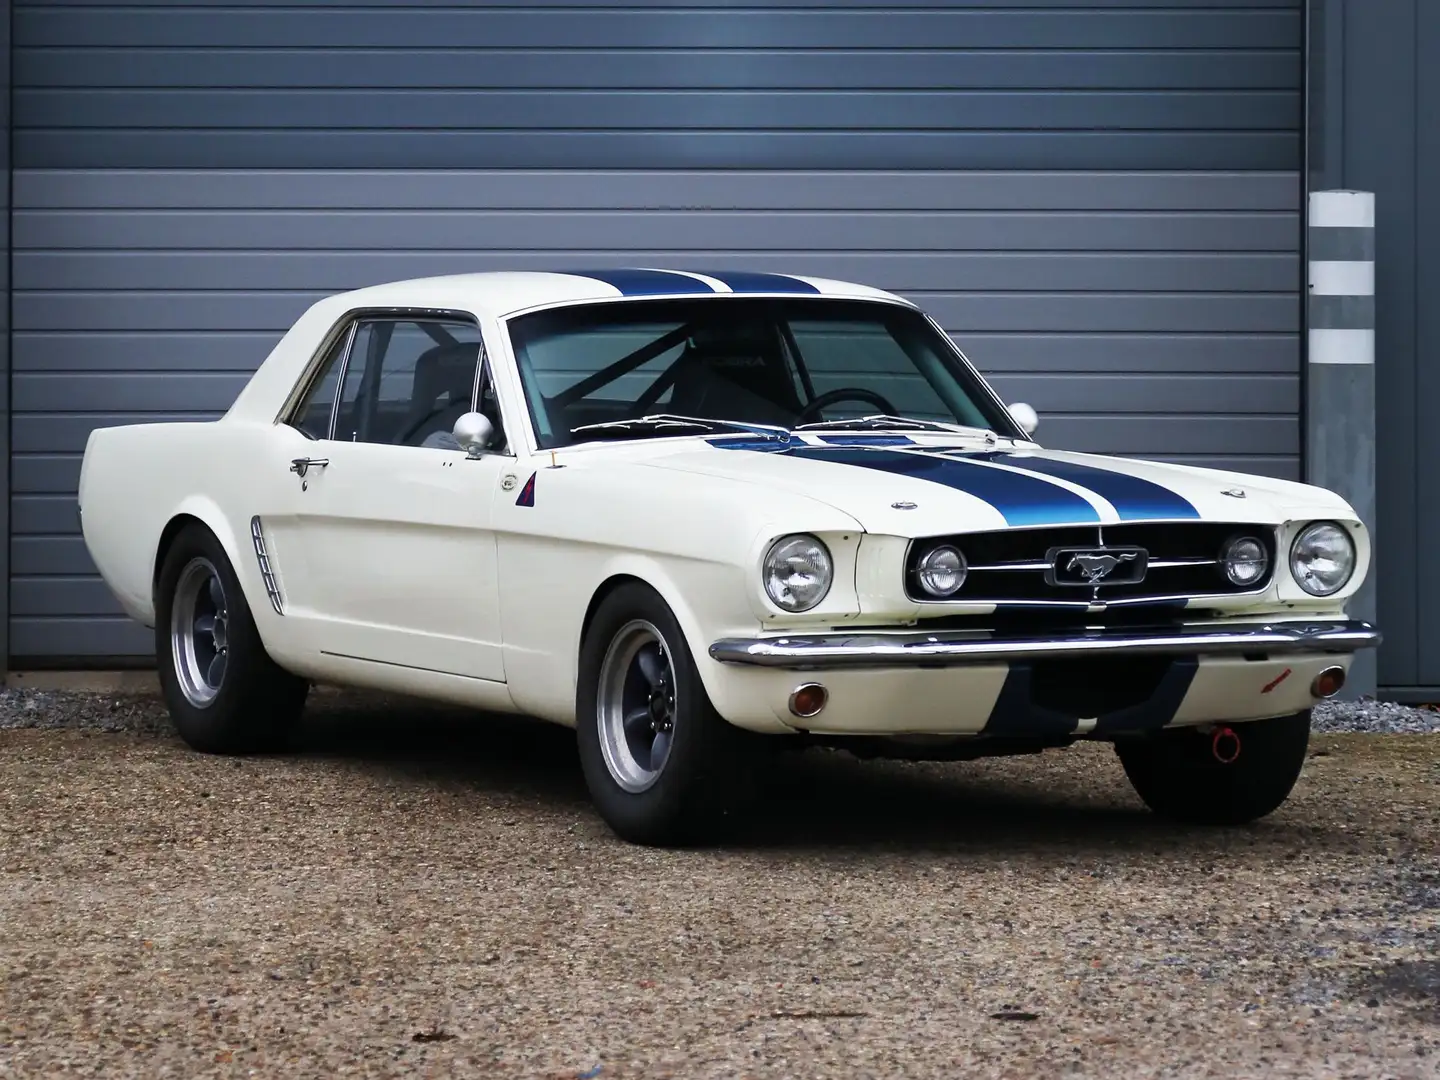 Ford Mustang Group 2 - Road Registered Beyaz - 1